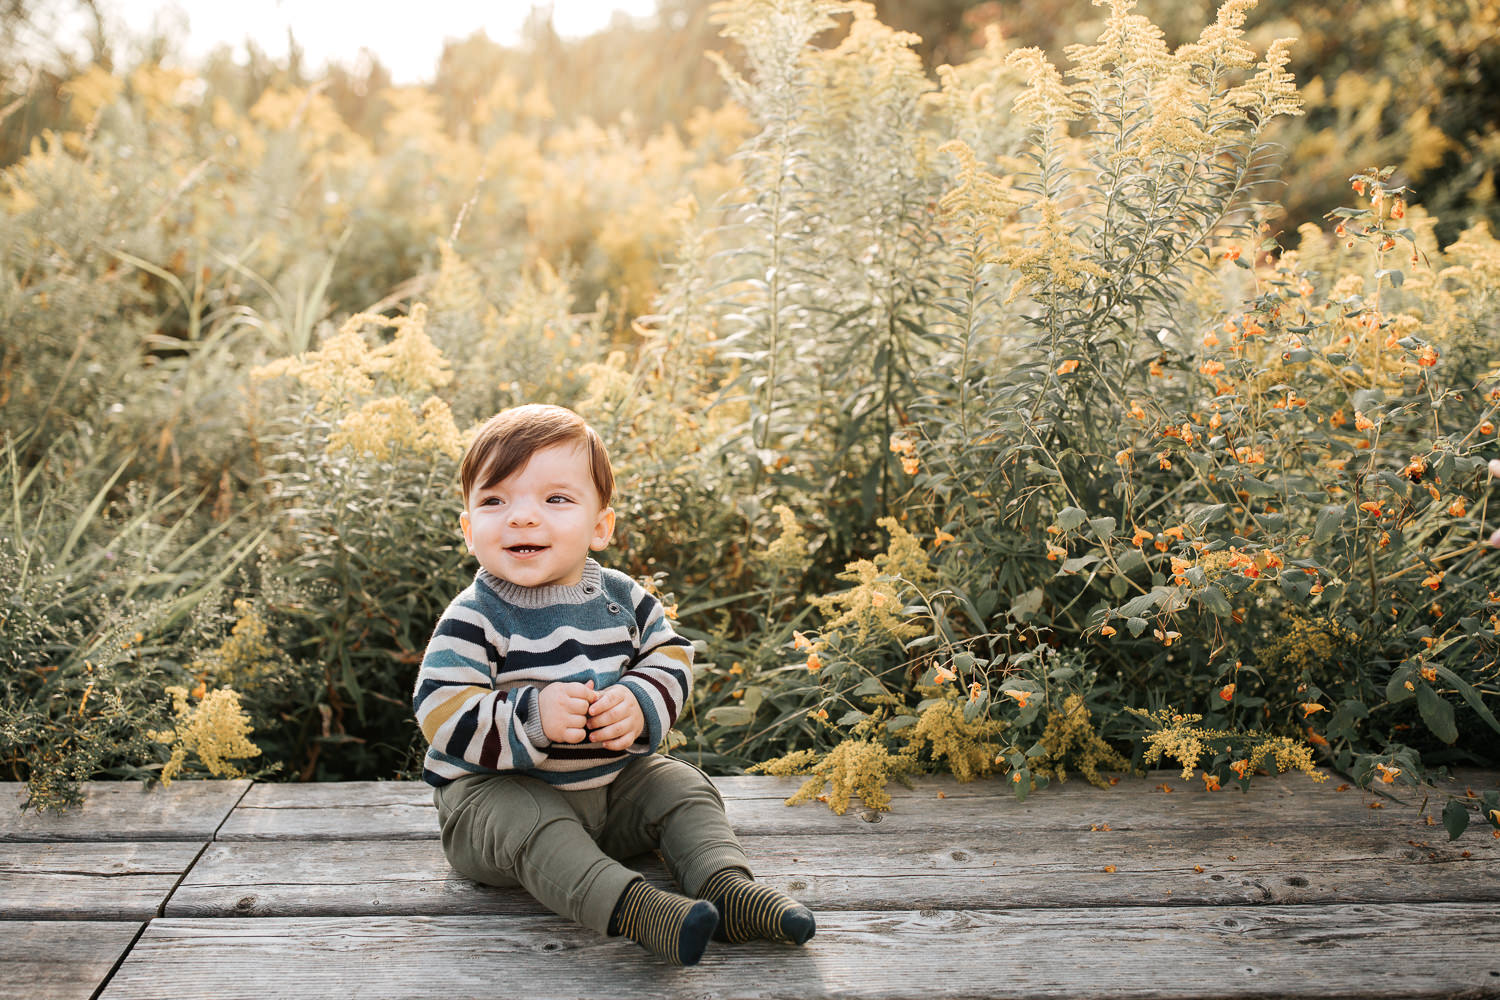 1 year old baby boy with brown hair wearing striped sweater sitting on wooden bench in front of yellow flowers, smiling, hands clasped  setting sun behind him - Stouffville Golden Hour Photography